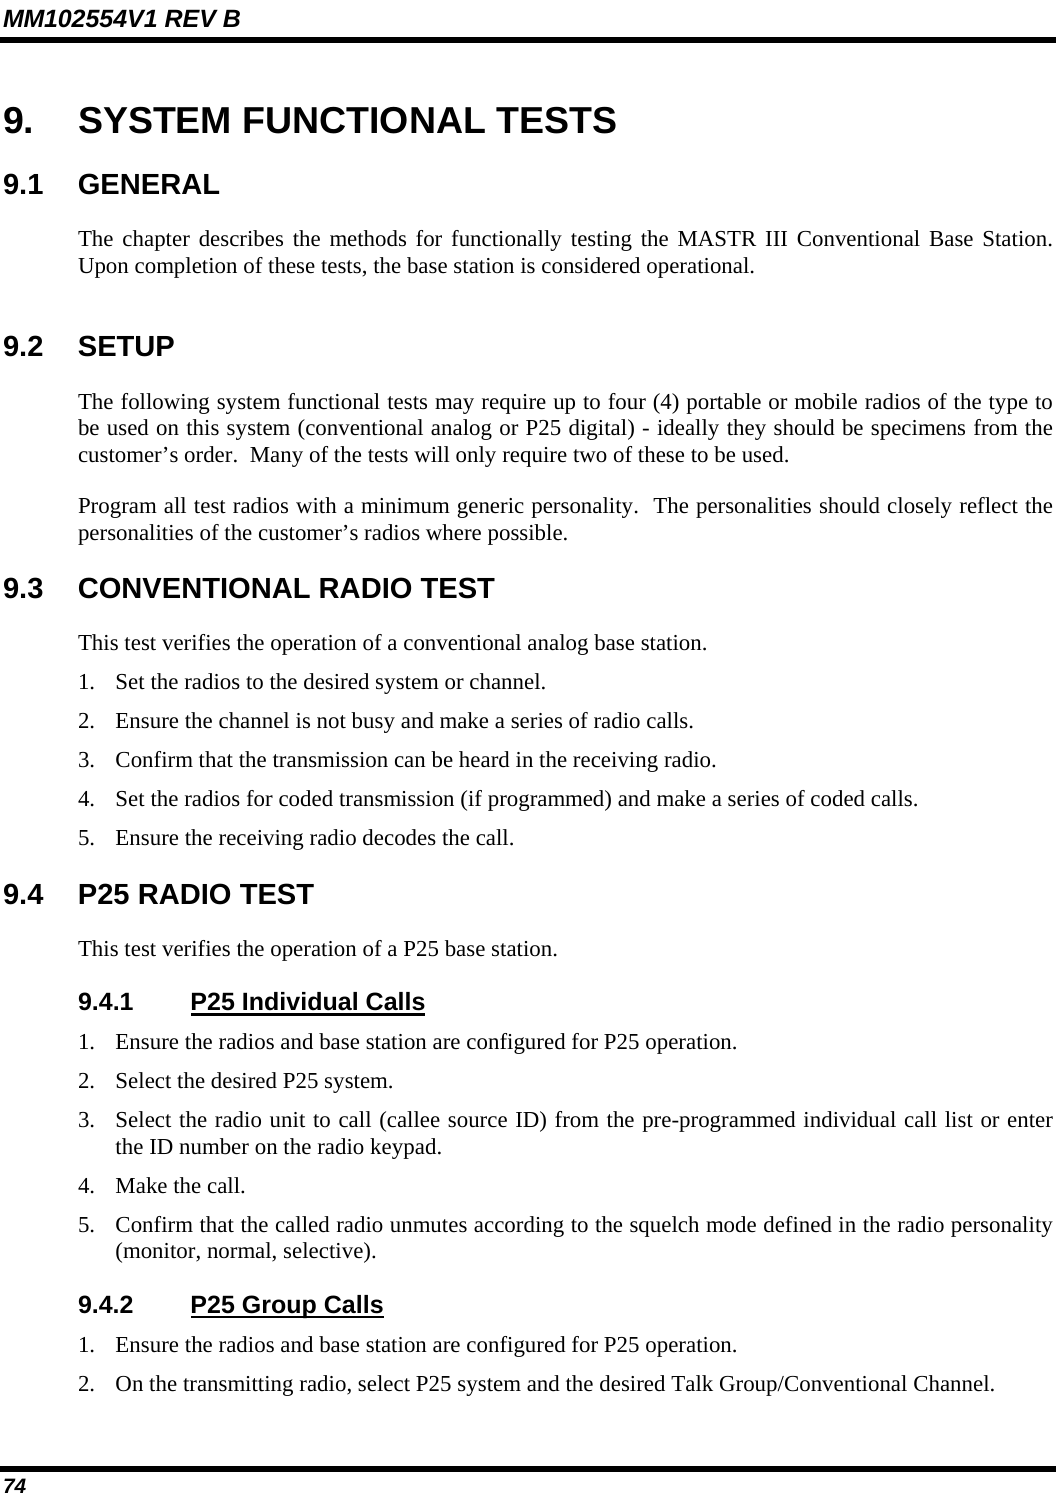 MM102554V1 REV B 74   9.  SYSTEM FUNCTIONAL TESTS 9.1 GENERAL The chapter describes the methods for functionally testing the MASTR III Conventional Base Station.  Upon completion of these tests, the base station is considered operational. 9.2 SETUP The following system functional tests may require up to four (4) portable or mobile radios of the type to be used on this system (conventional analog or P25 digital) - ideally they should be specimens from the customer’s order.  Many of the tests will only require two of these to be used.   Program all test radios with a minimum generic personality.  The personalities should closely reflect the personalities of the customer’s radios where possible.   9.3  CONVENTIONAL RADIO TEST This test verifies the operation of a conventional analog base station. 1. Set the radios to the desired system or channel. 2. Ensure the channel is not busy and make a series of radio calls.  3. Confirm that the transmission can be heard in the receiving radio. 4. Set the radios for coded transmission (if programmed) and make a series of coded calls. 5. Ensure the receiving radio decodes the call. 9.4  P25 RADIO TEST This test verifies the operation of a P25 base station. 9.4.1  P25 Individual Calls 1. Ensure the radios and base station are configured for P25 operation. 2. Select the desired P25 system.  3. Select the radio unit to call (callee source ID) from the pre-programmed individual call list or enter the ID number on the radio keypad. 4. Make the call. 5. Confirm that the called radio unmutes according to the squelch mode defined in the radio personality (monitor, normal, selective). 9.4.2  P25 Group Calls 1. Ensure the radios and base station are configured for P25 operation. 2. On the transmitting radio, select P25 system and the desired Talk Group/Conventional Channel.  